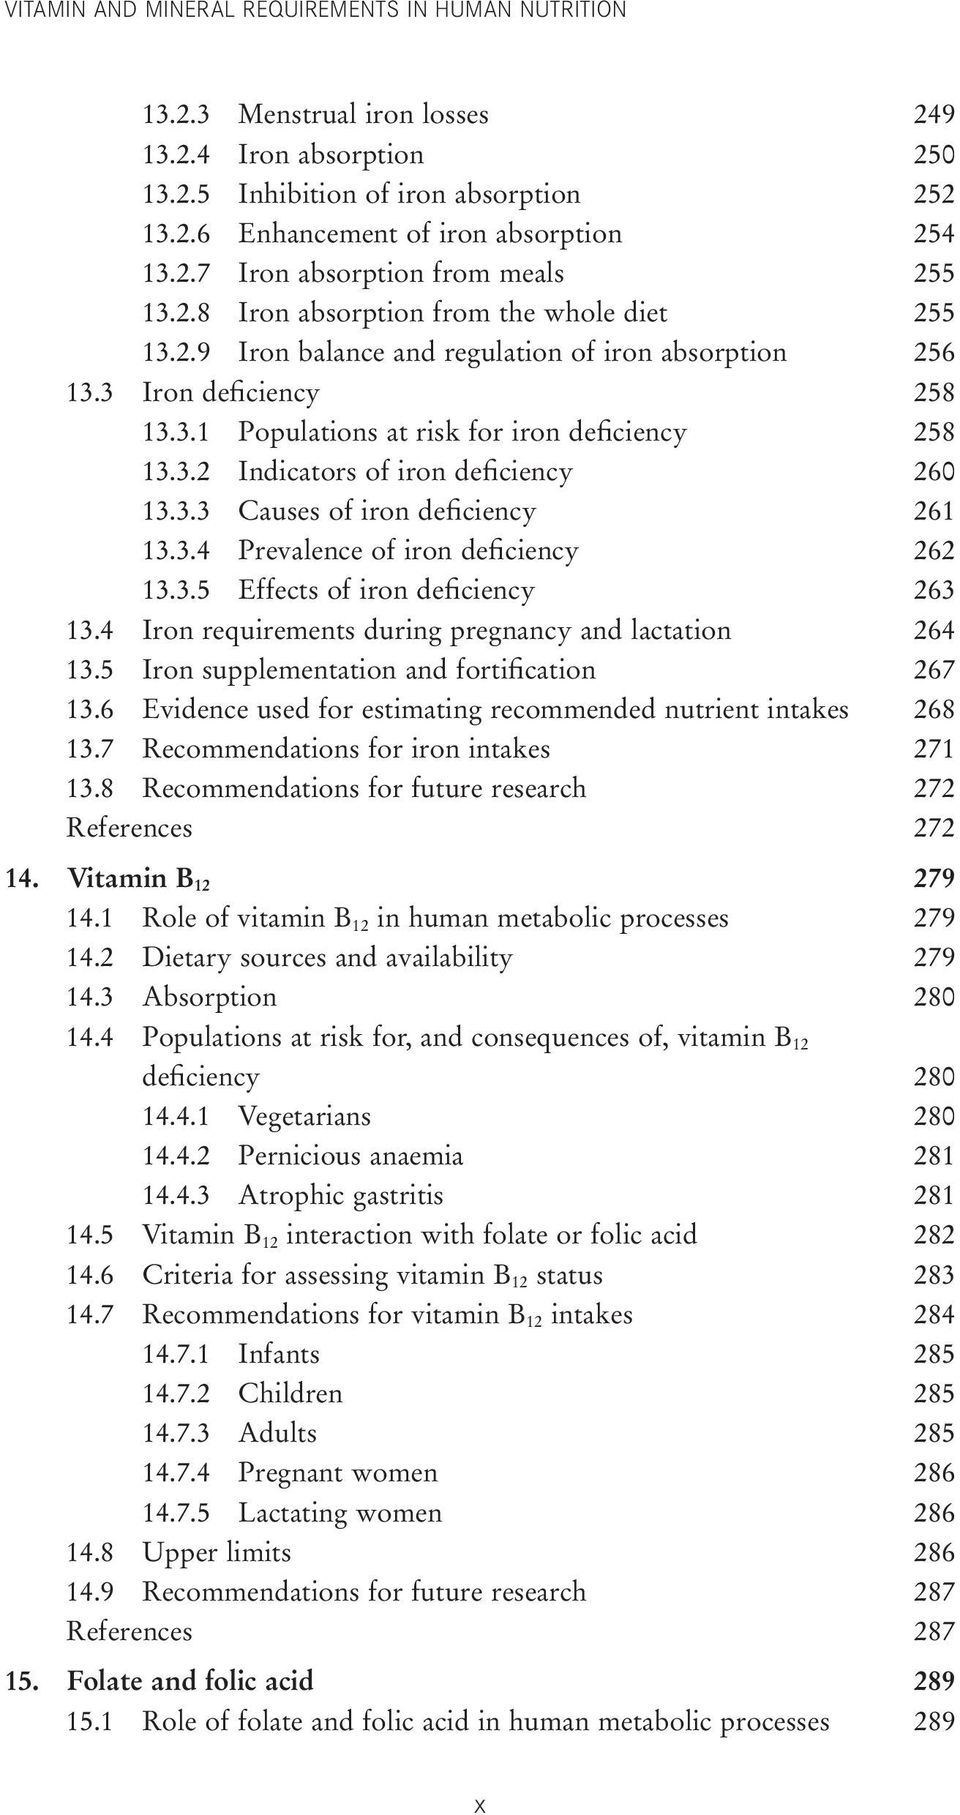 3.3 Causes of iron deficiency 261 13.3.4 Prevalence of iron deficiency 262 13.3.5 Effects of iron deficiency 263 13.4 Iron requirements during pregnancy and lactation 264 13.